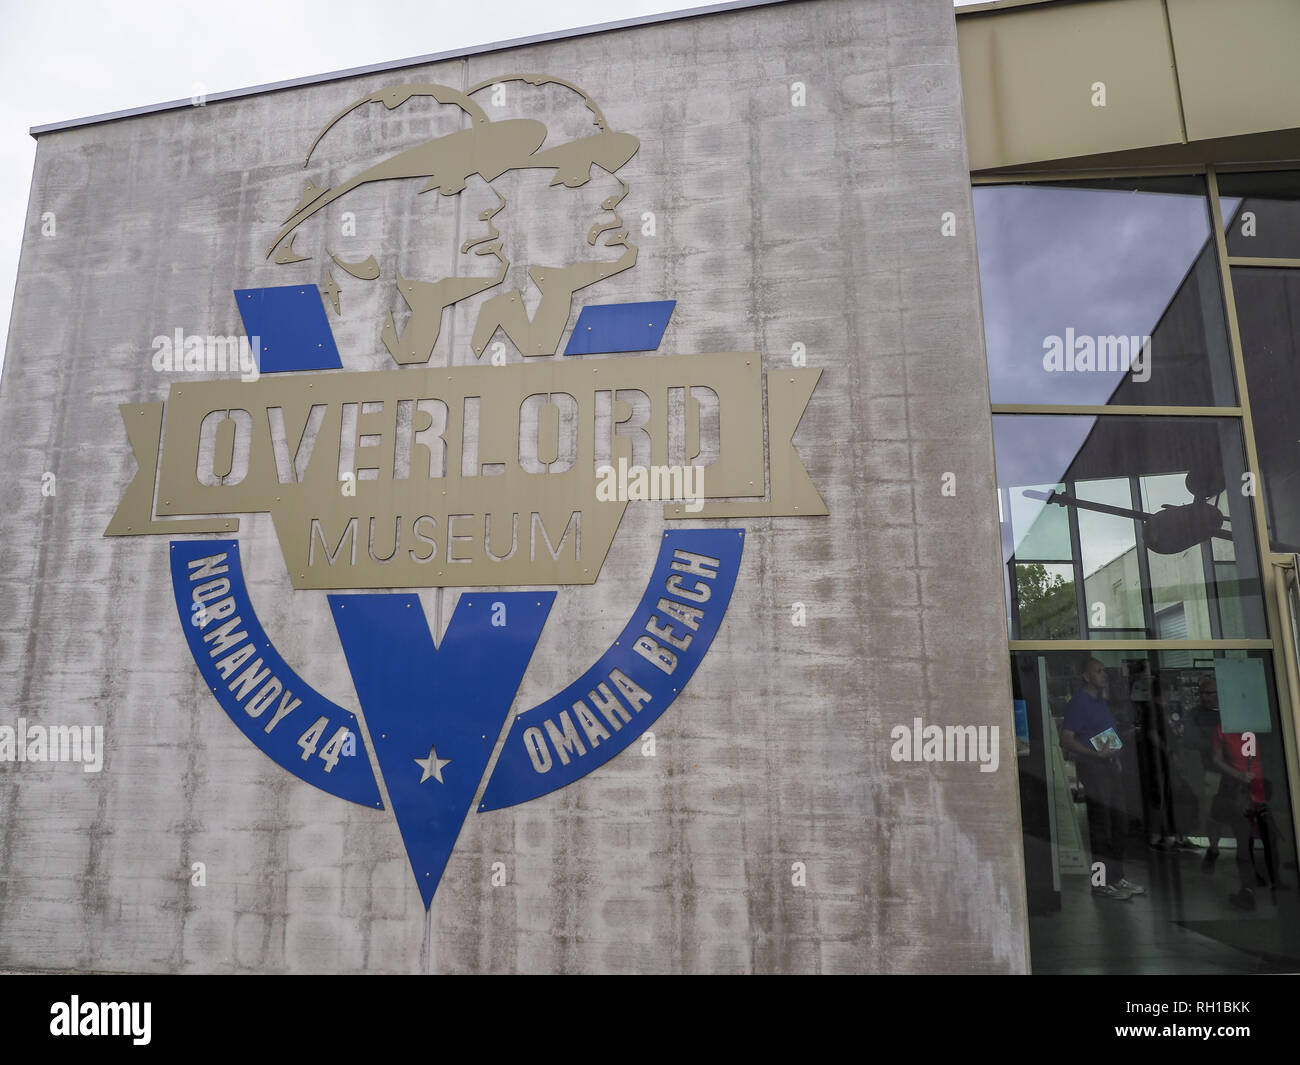 Overlord Museum, Colleville sur Mer, Calvados, France, Europe, Normandiy Banque D'Images